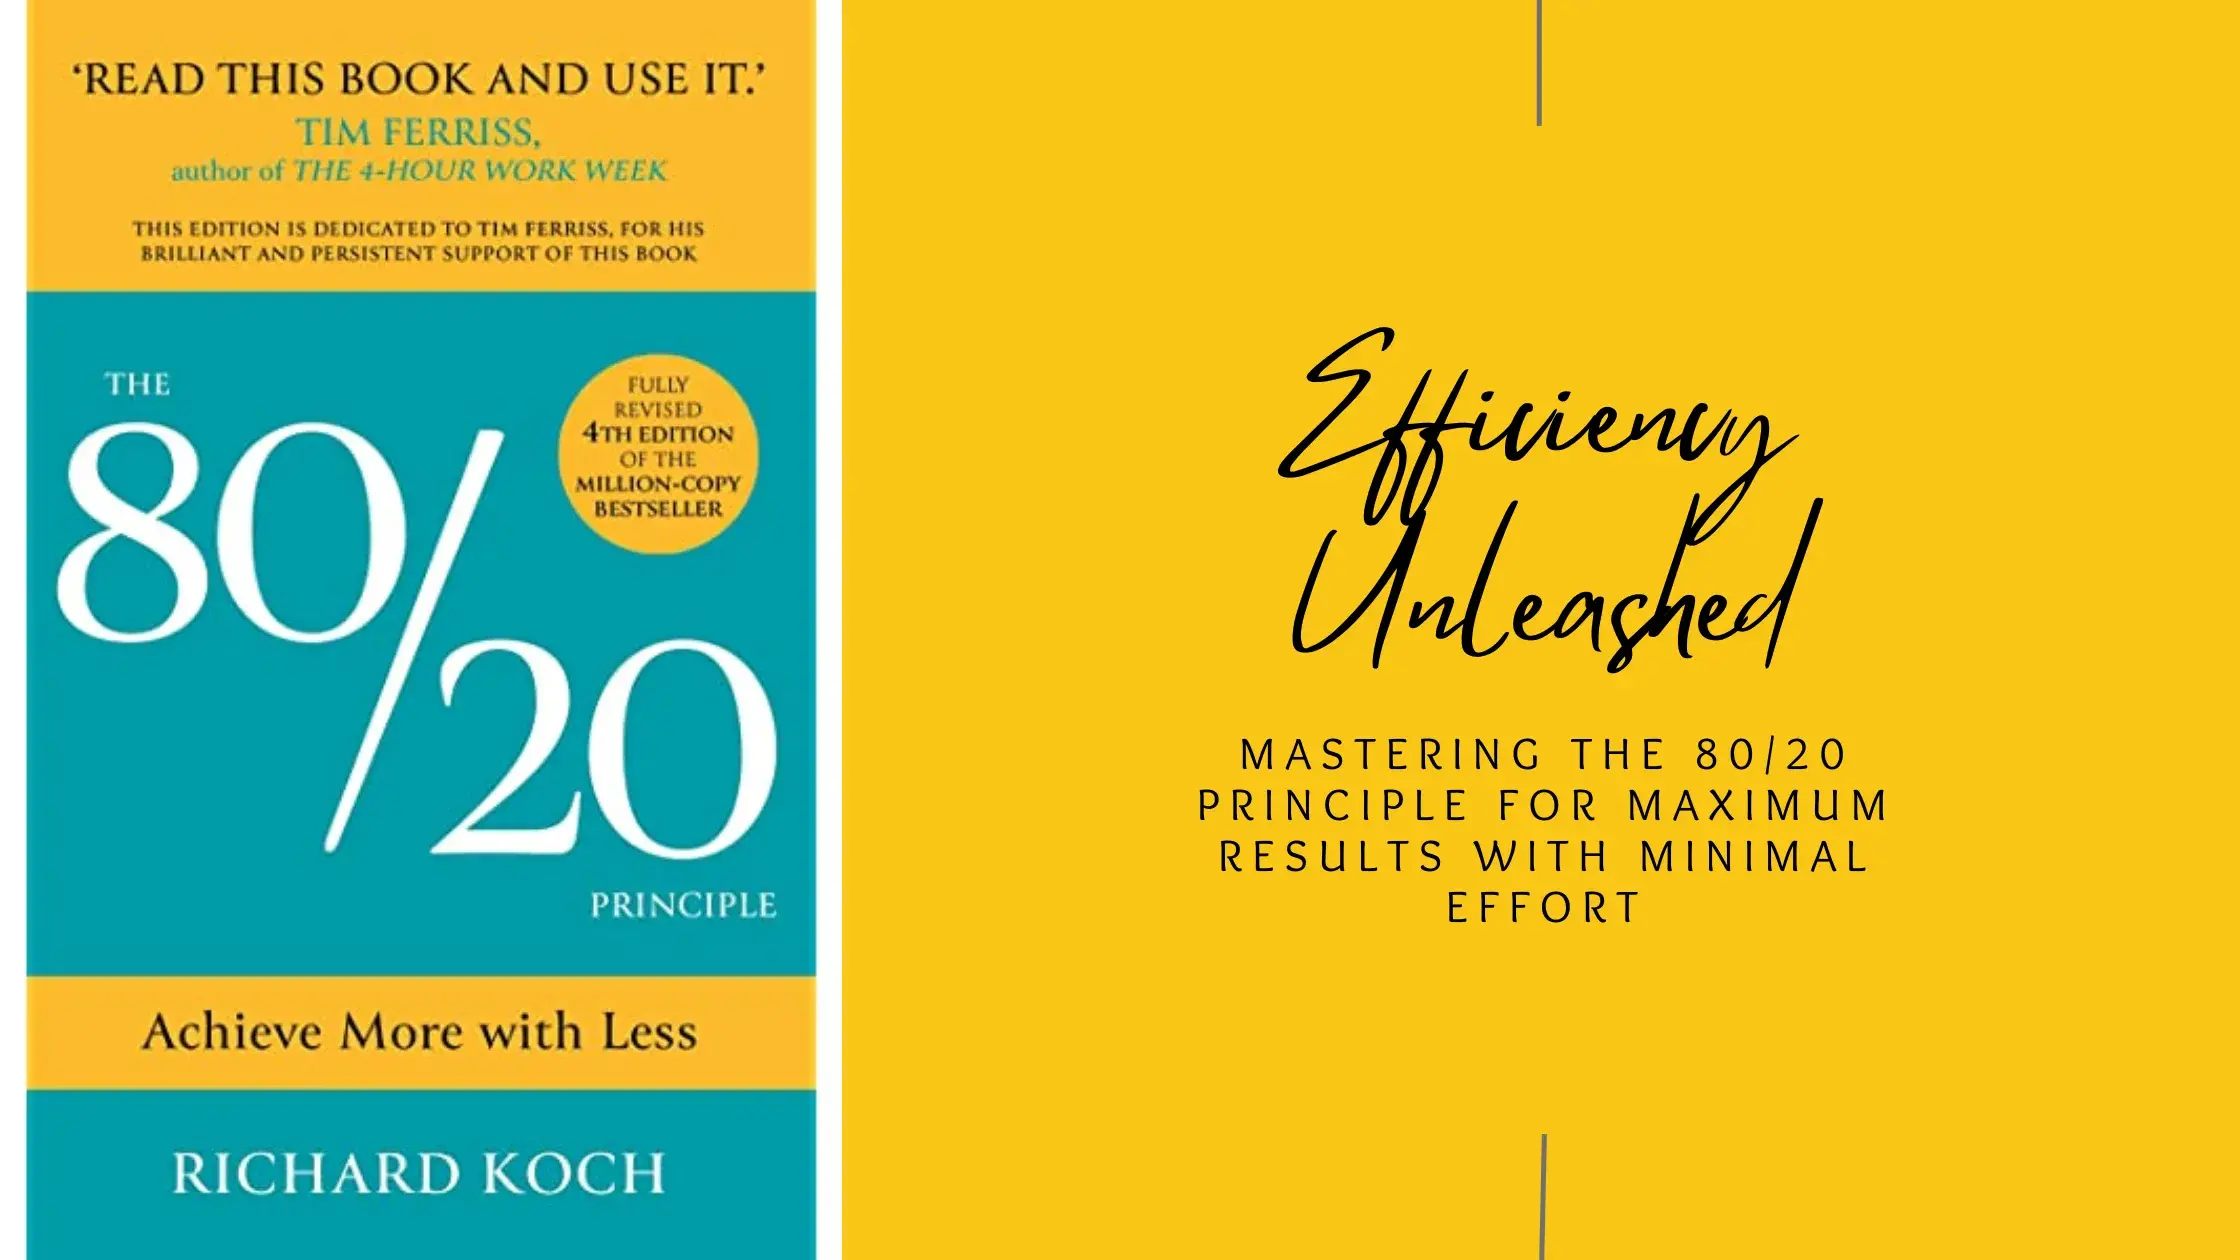 Efficiency Unleashed: Mastering the 80/20 Principle for Maximum Results with Minimal Effort